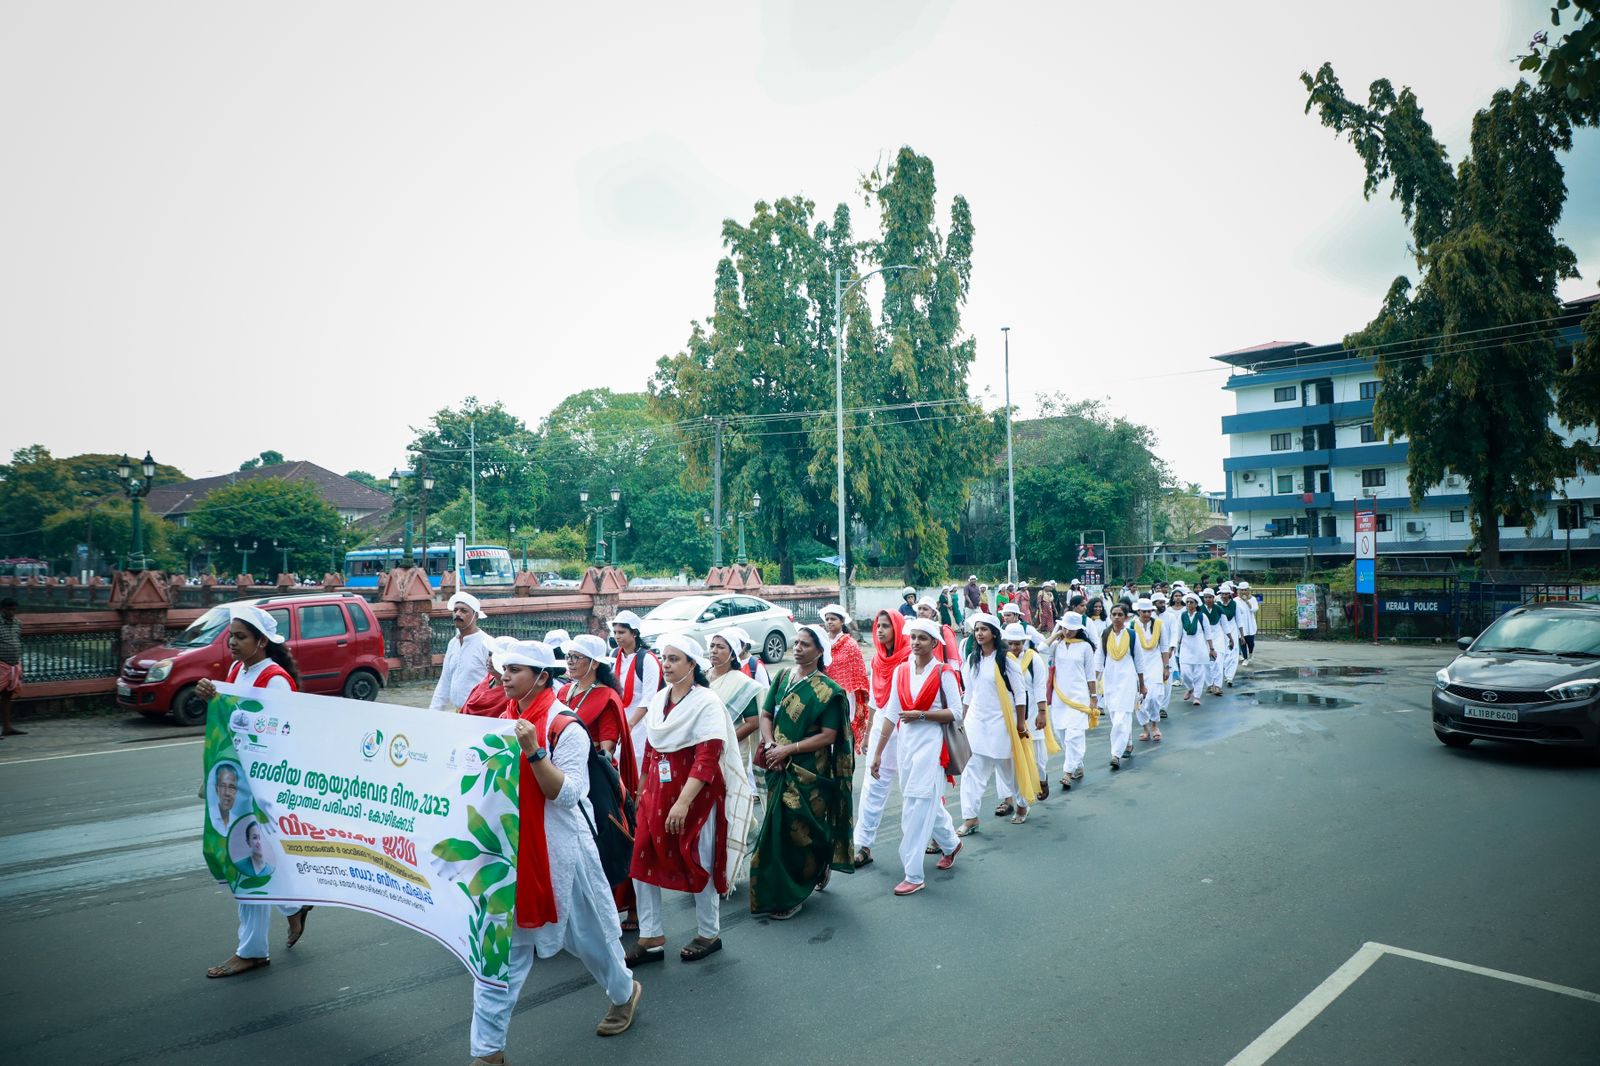 Rally conducted in association with NAM & ISM Dept., at Mananchira (Kozhikode)